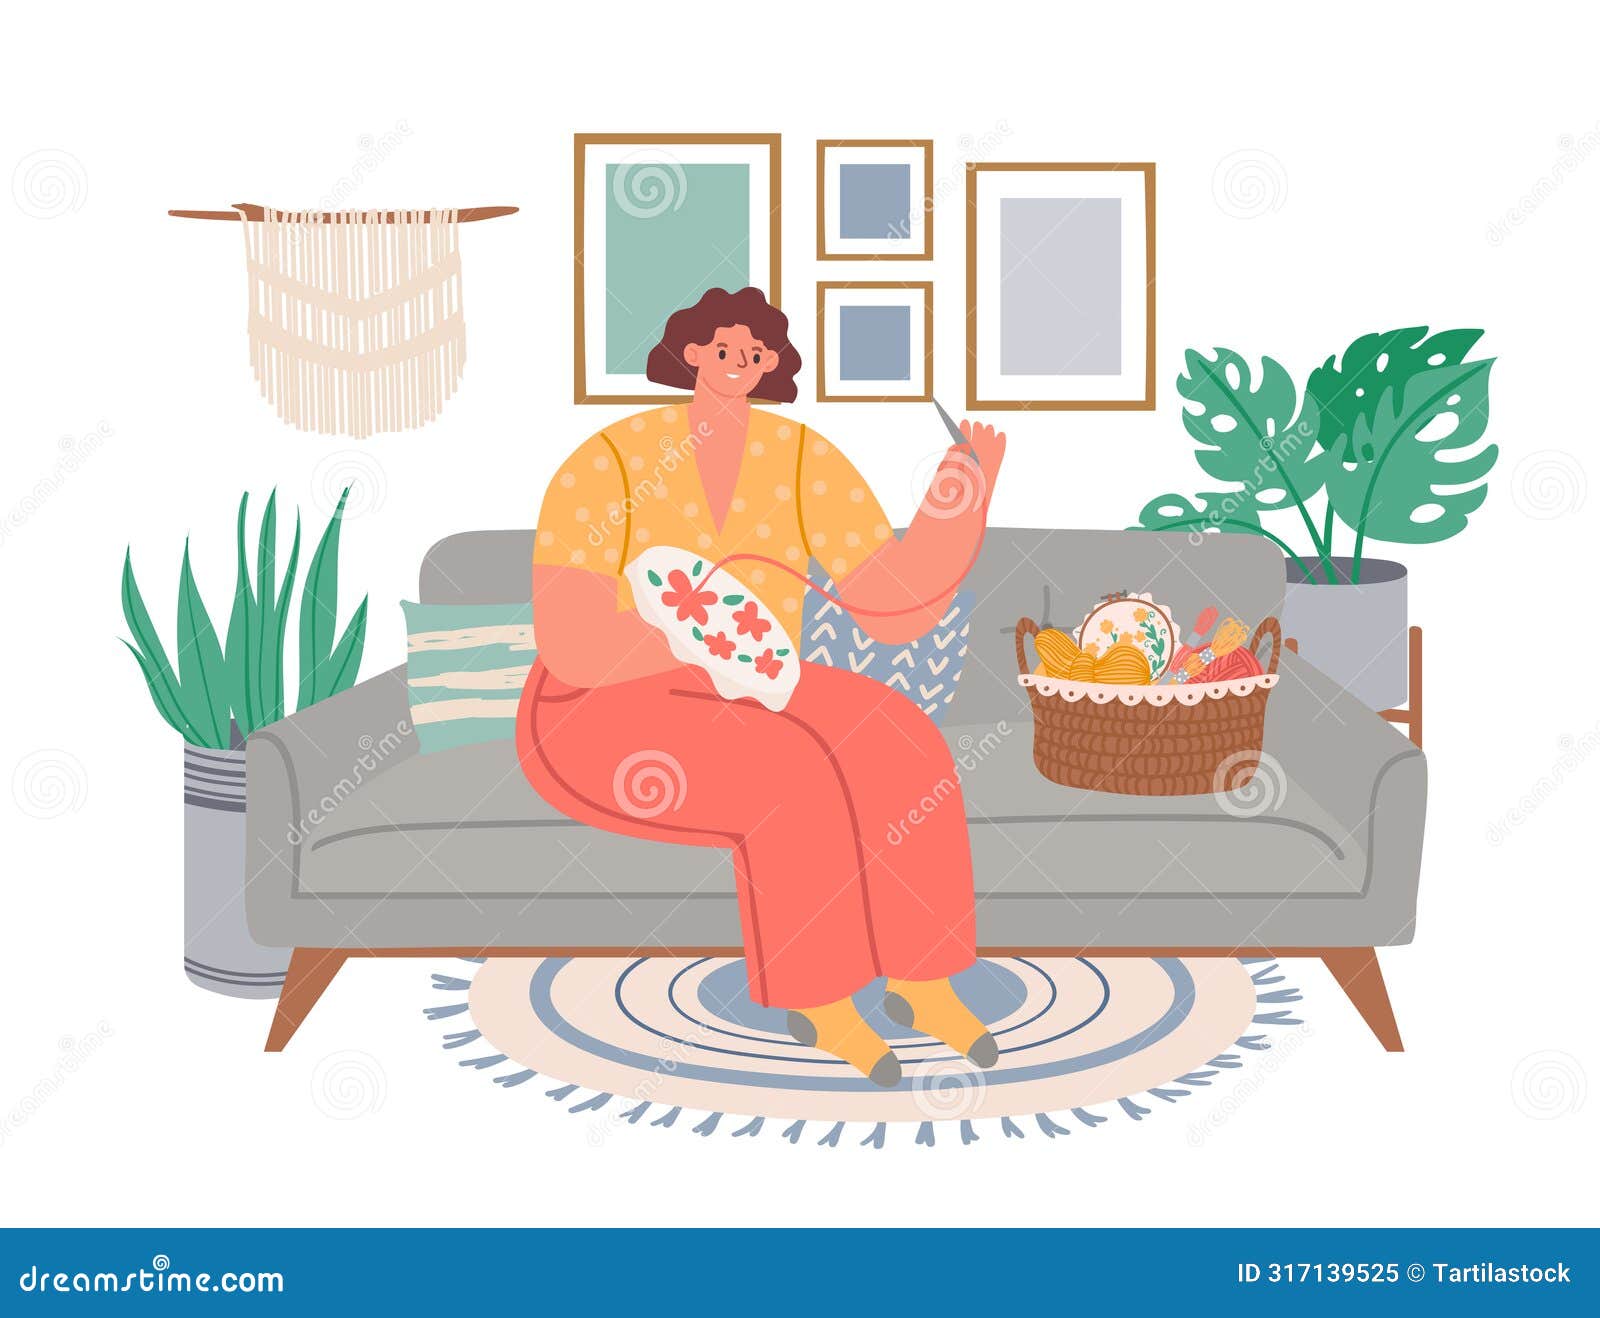 woman embroidering. relax at home. people do hobby in home